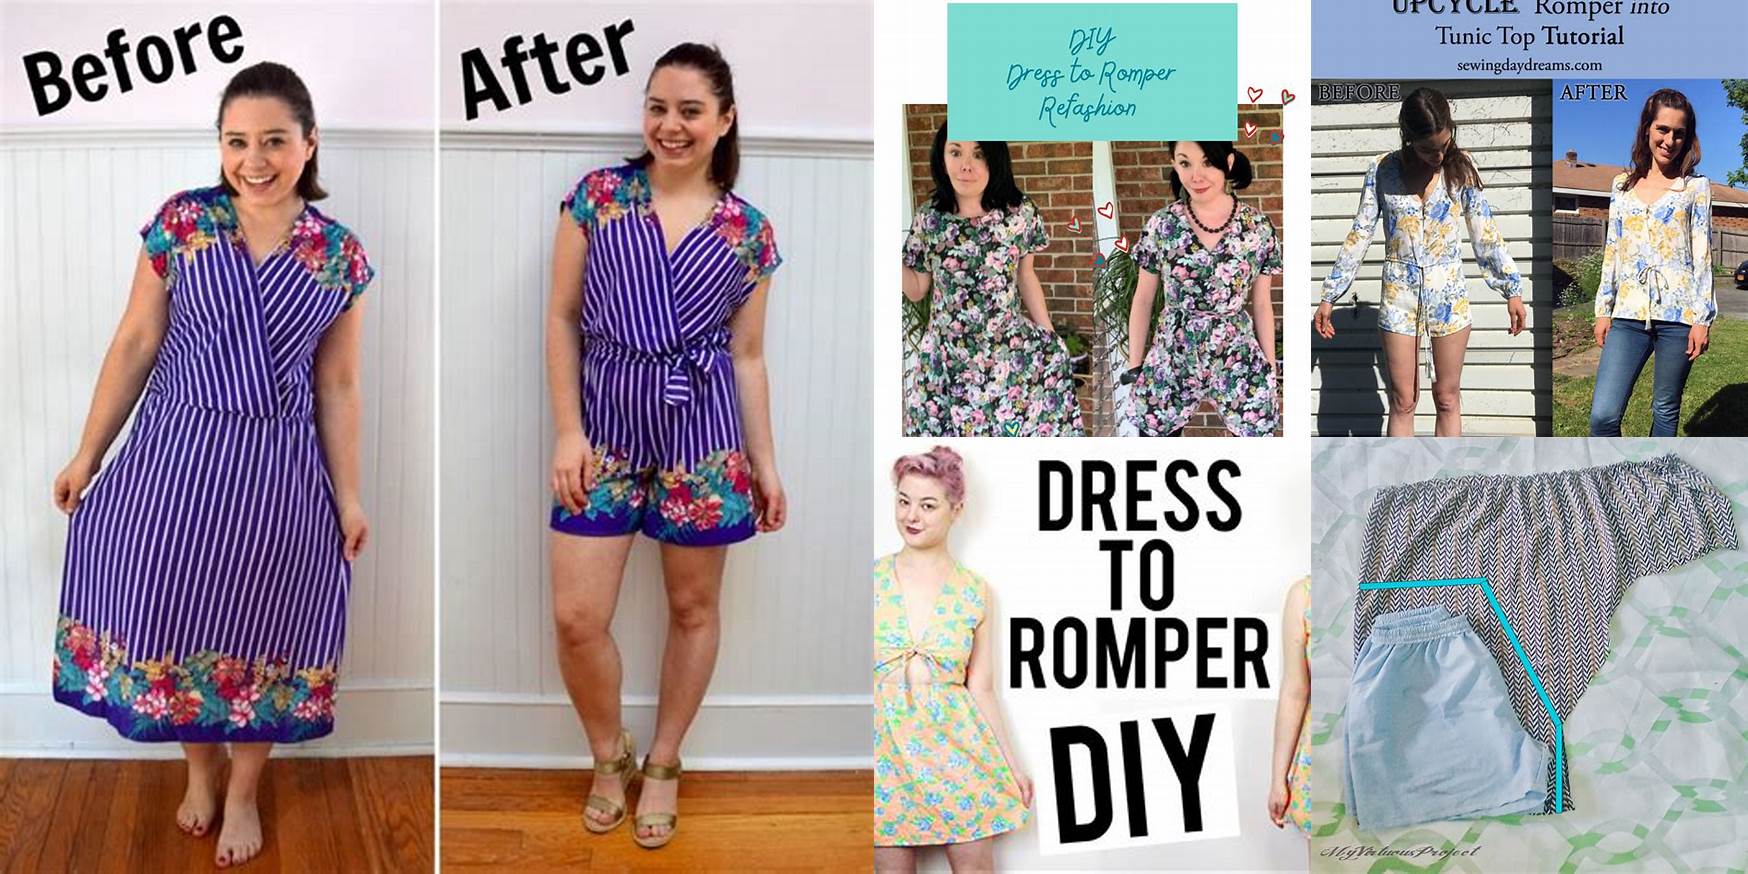 How To Make A Dress Into A Romper